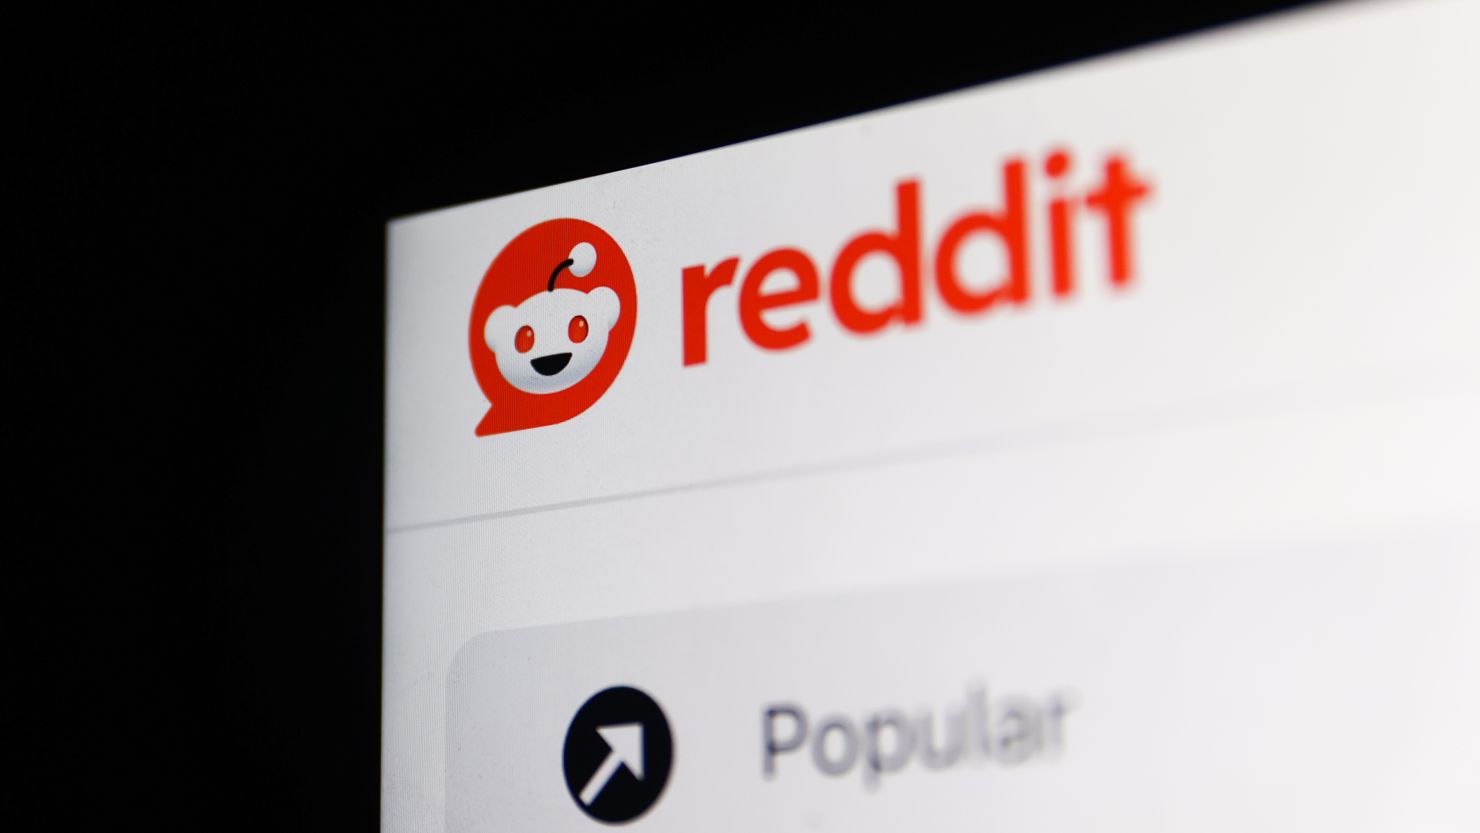 Reddit's logo on website displayed on a laptop screen is seen in this illustration photo taken in Krakow, Poland on February 22, 2024.